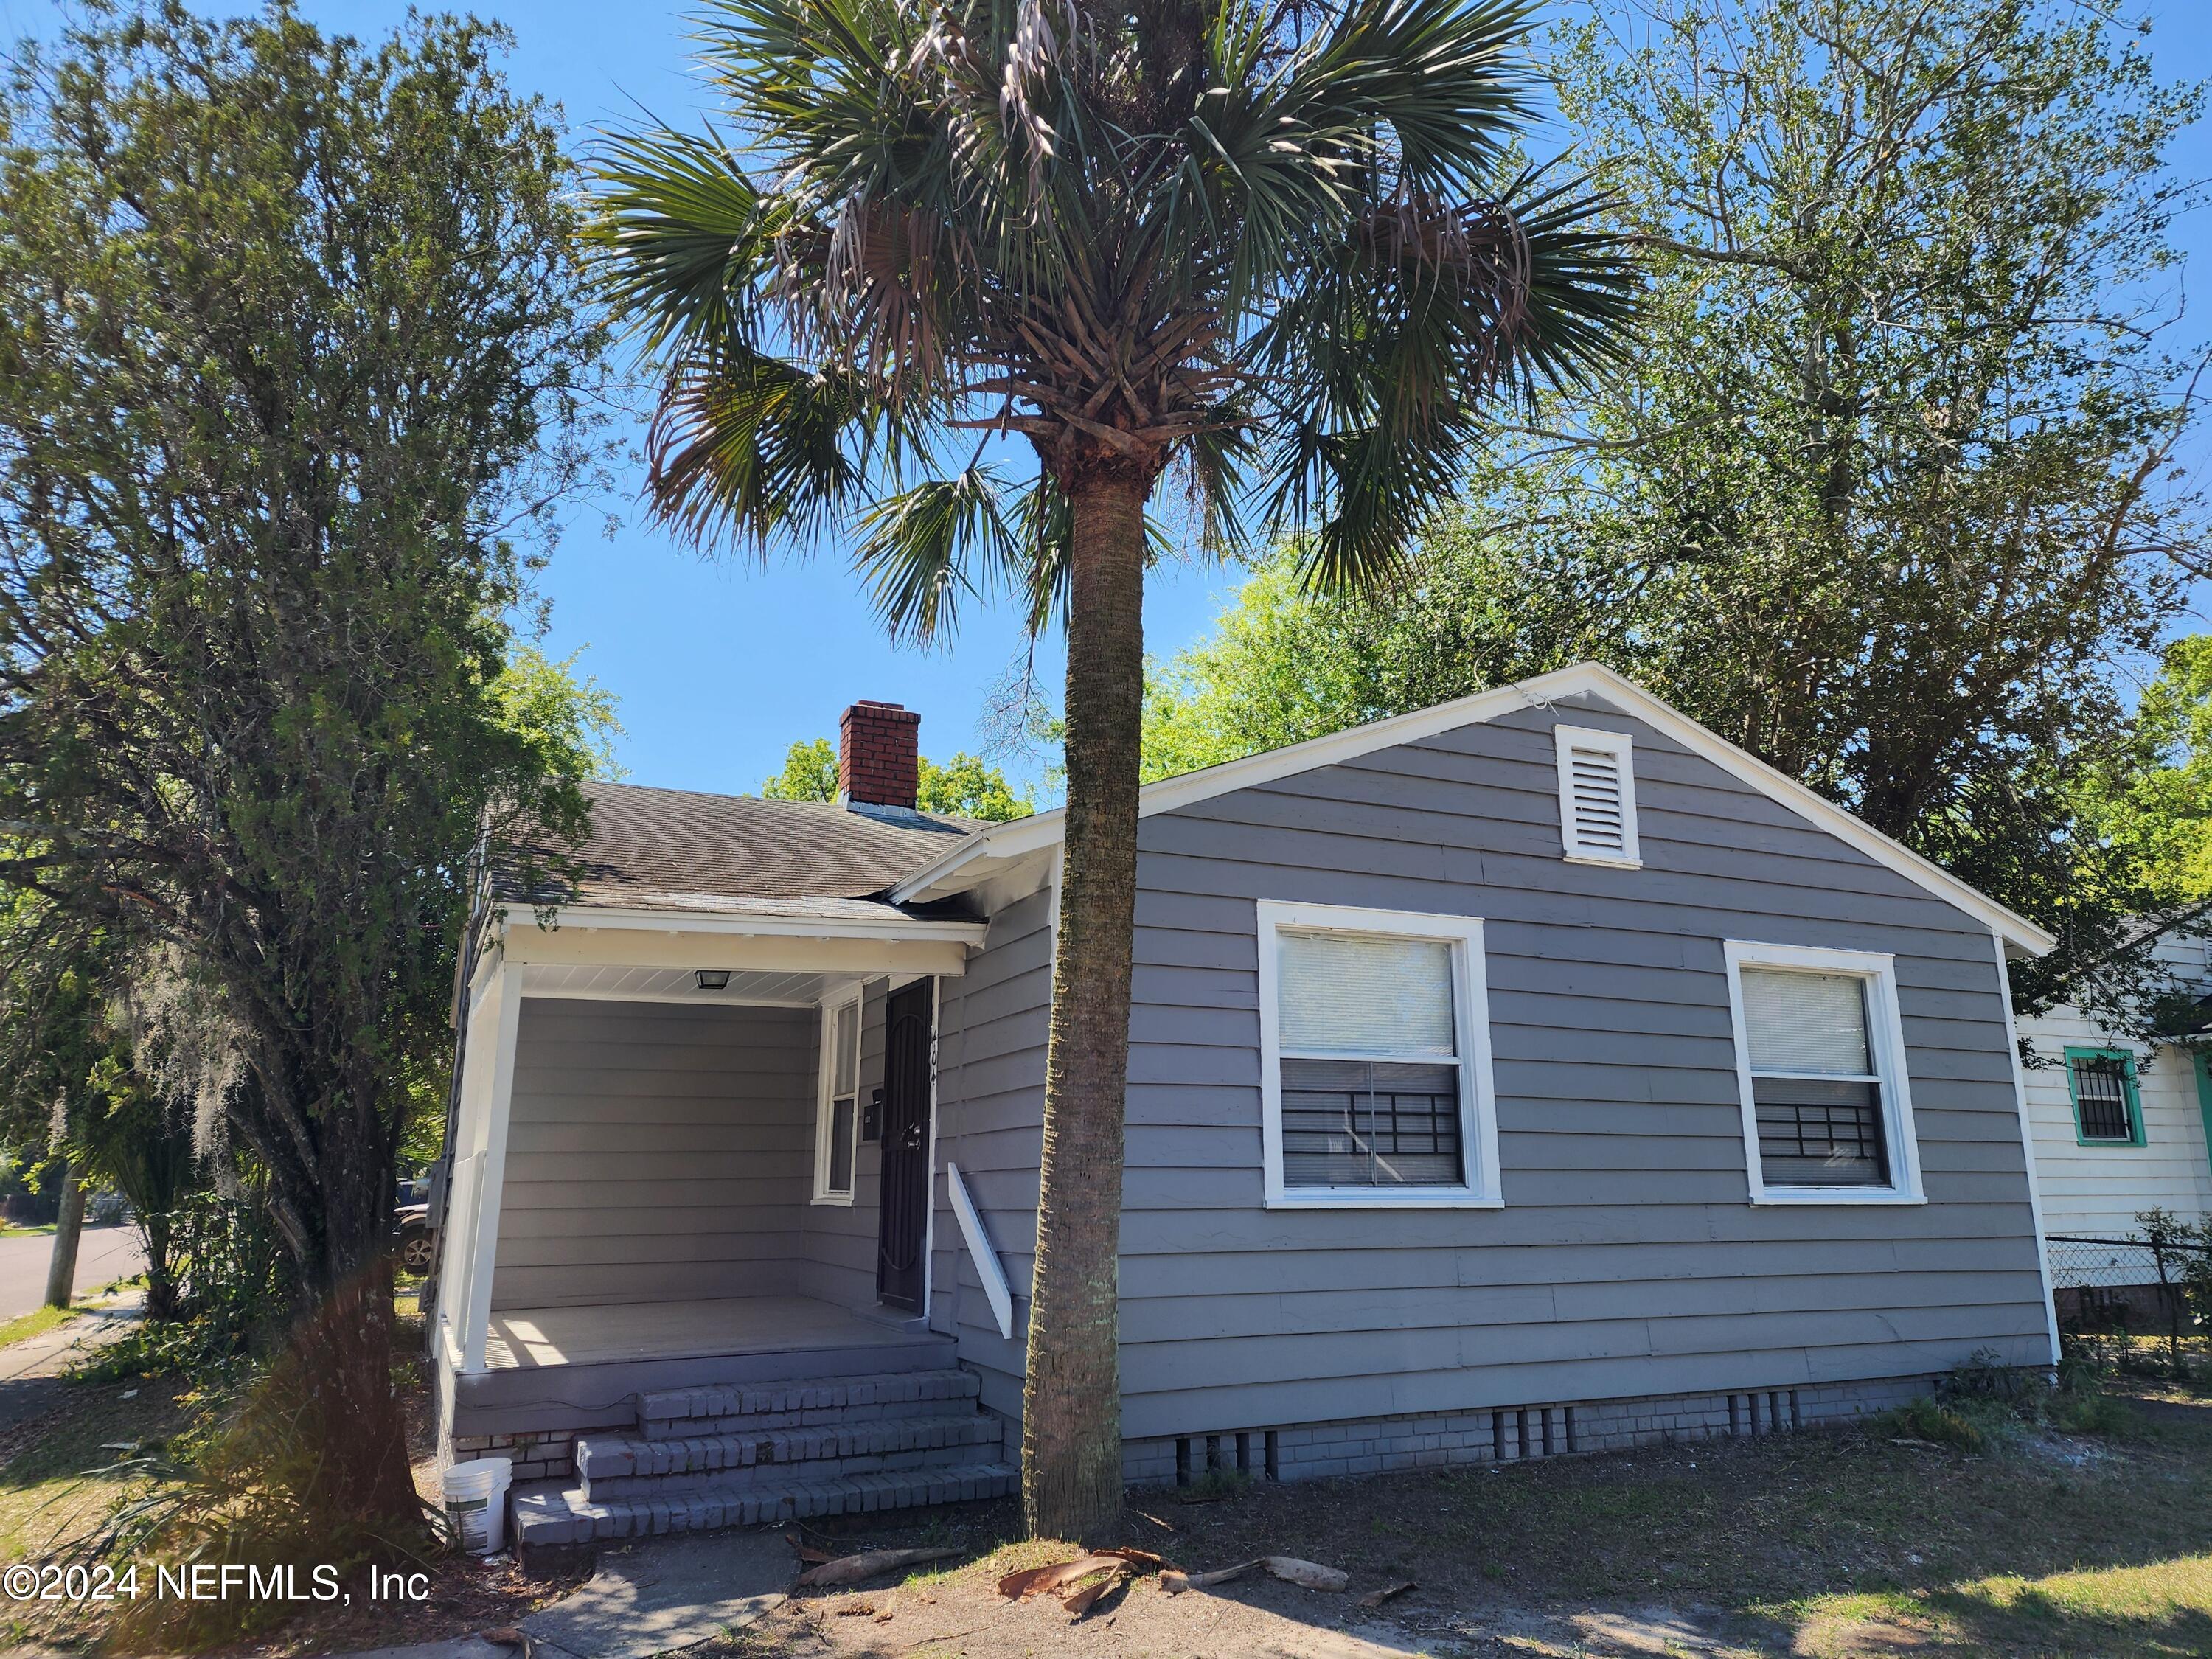 Jacksonville, FL home for sale located at 404 W 24th Street, Jacksonville, FL 32206